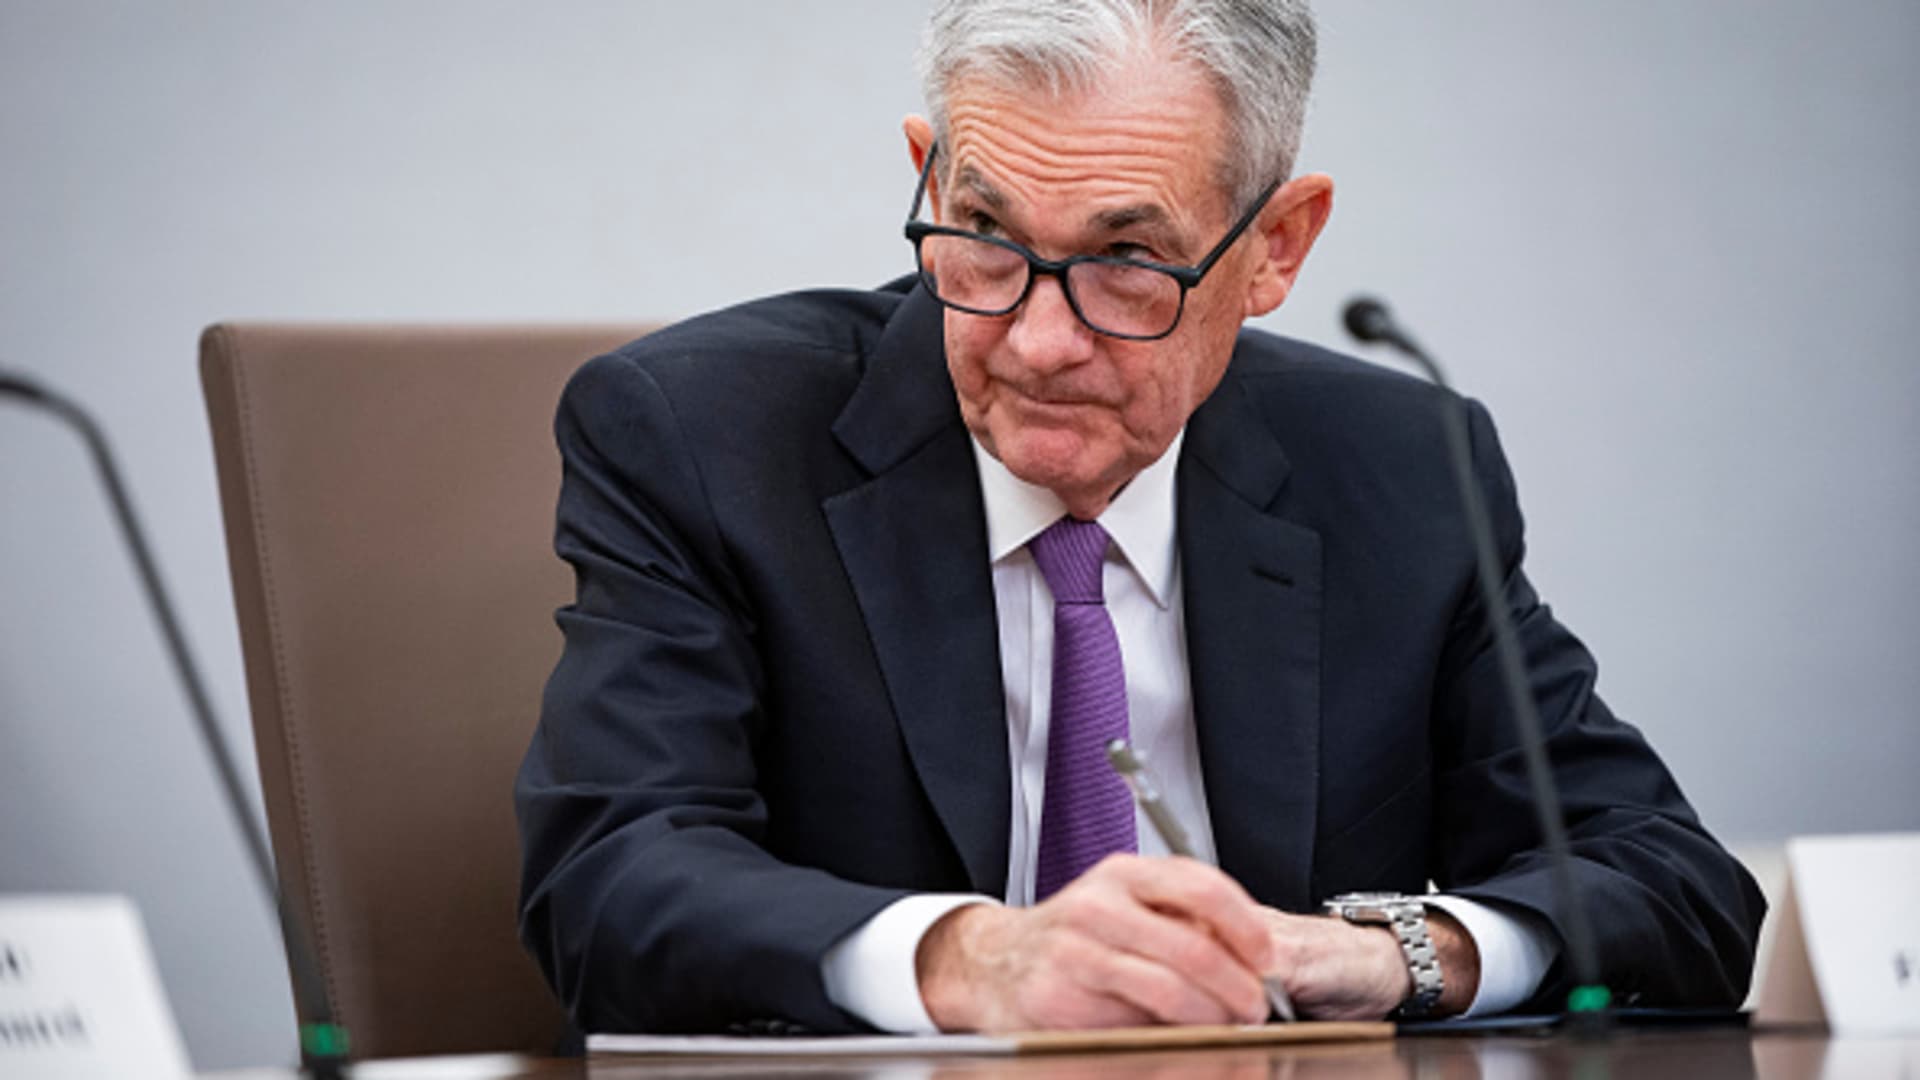 Jerome Powell, chairman of the US Federal Reserve, during a Fed Listens event in Washington, DC, US, on Friday, March 22, 2024. A trio of central bank decisions this week sent a clear message to markets that officials are preparing to loosen monetary policy, reigniting investor appetite for risk.